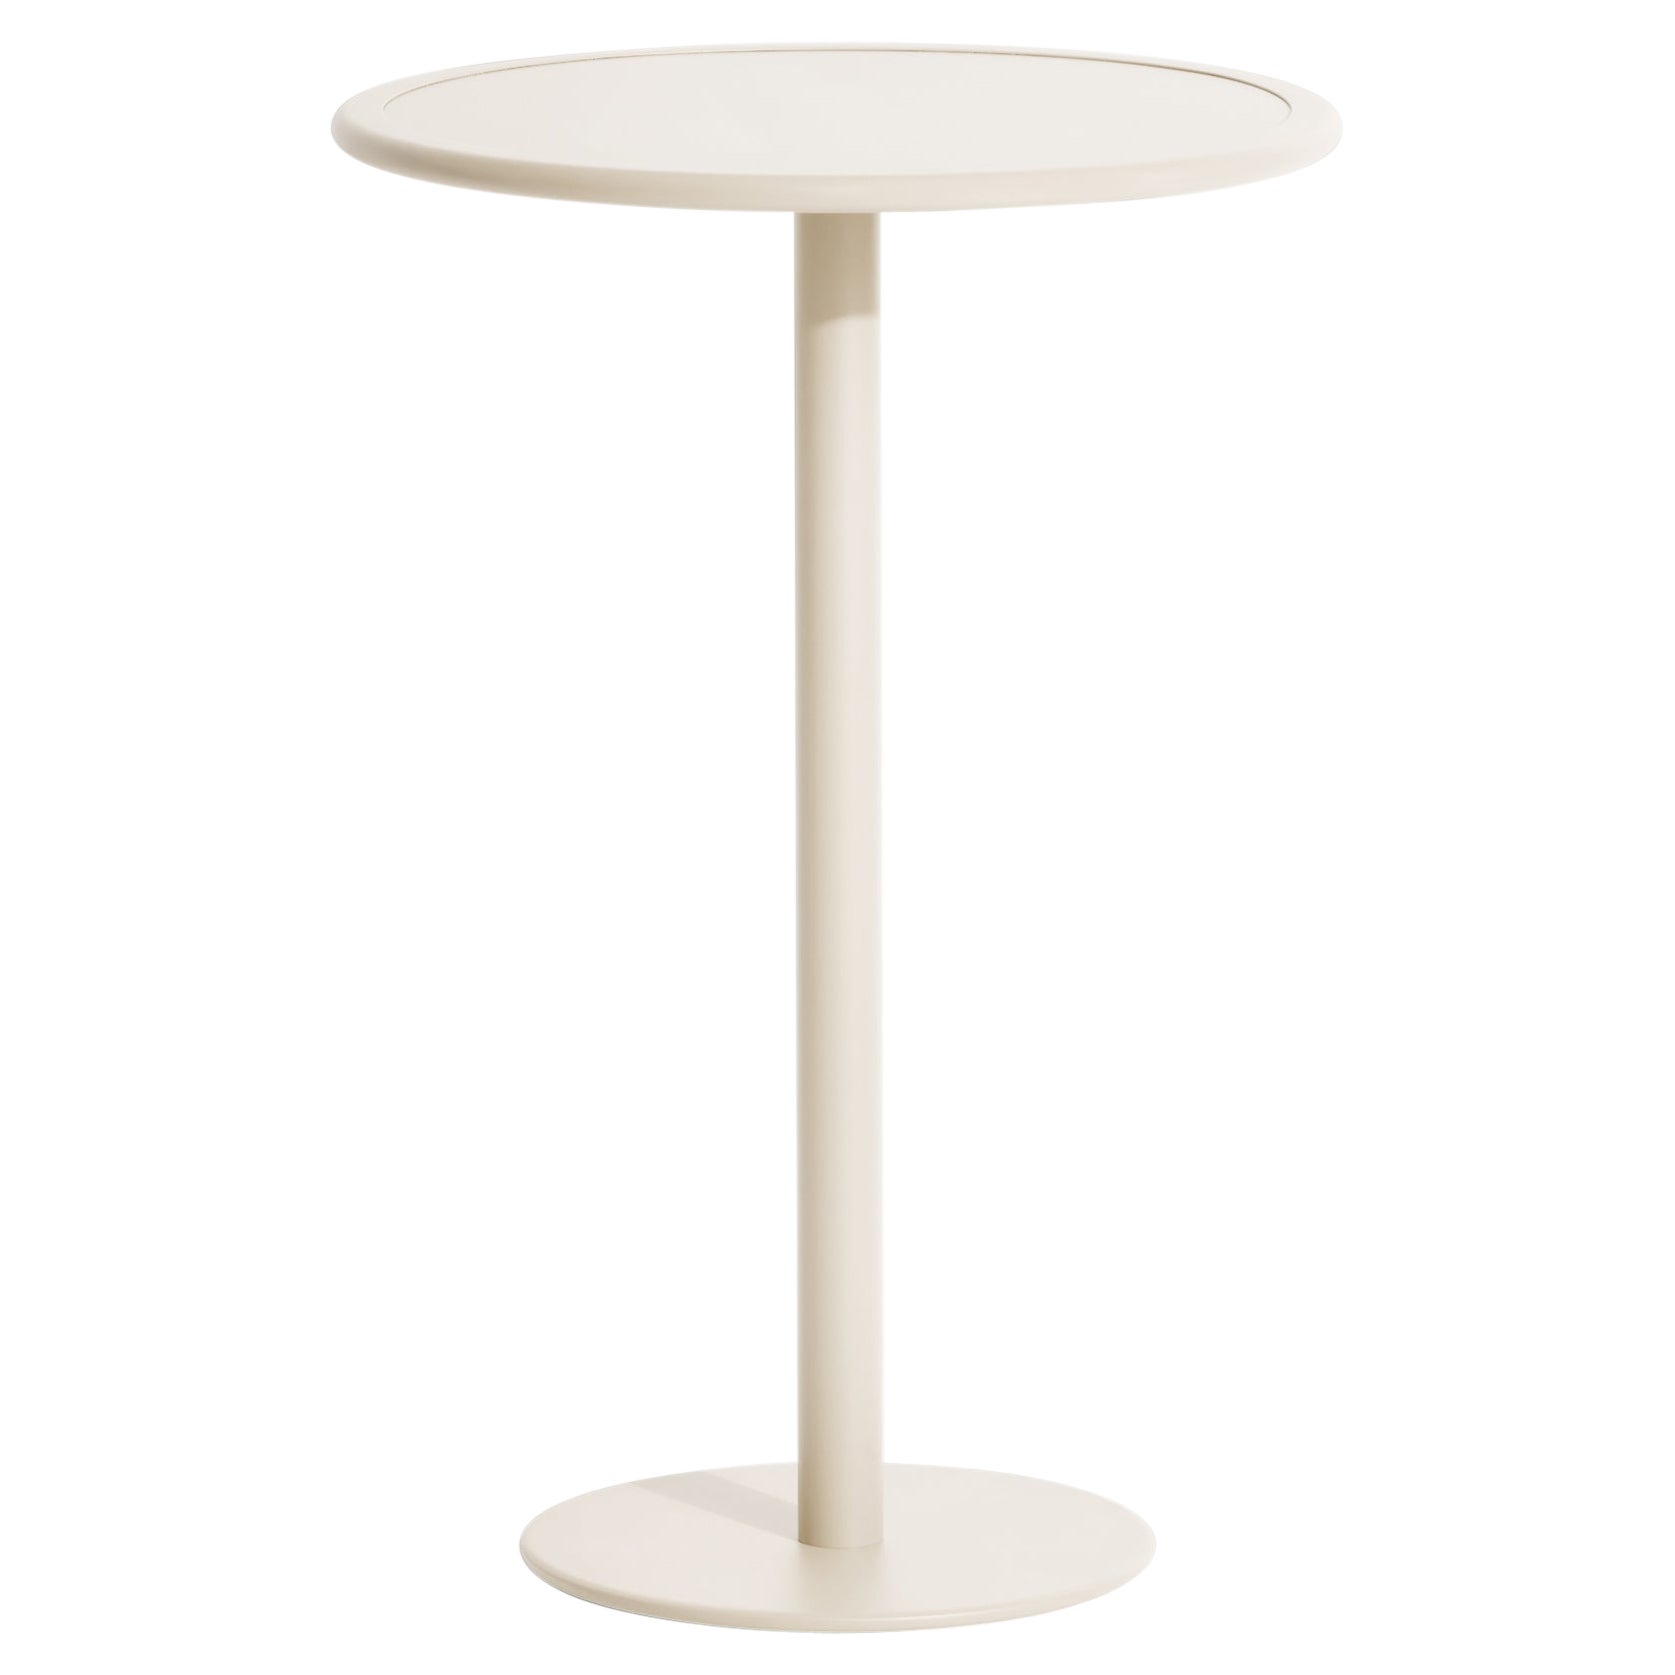 Petite Friture Week-End Round High Table in Ivory Aluminium, 2017 For Sale